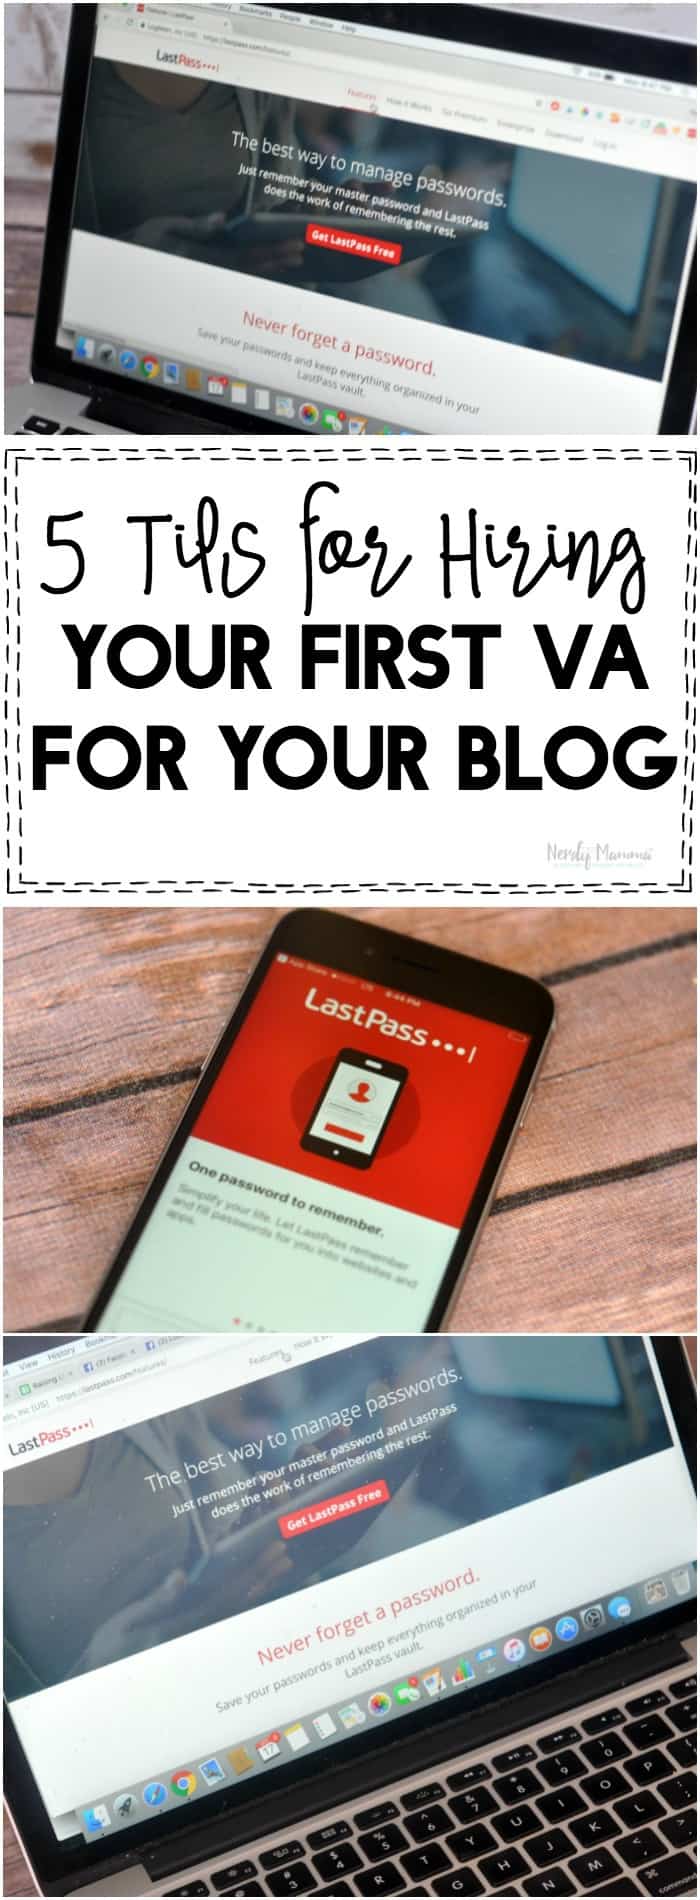 OMG! If you're ready to hire a VA for your blog for the first time you NEED these tips!